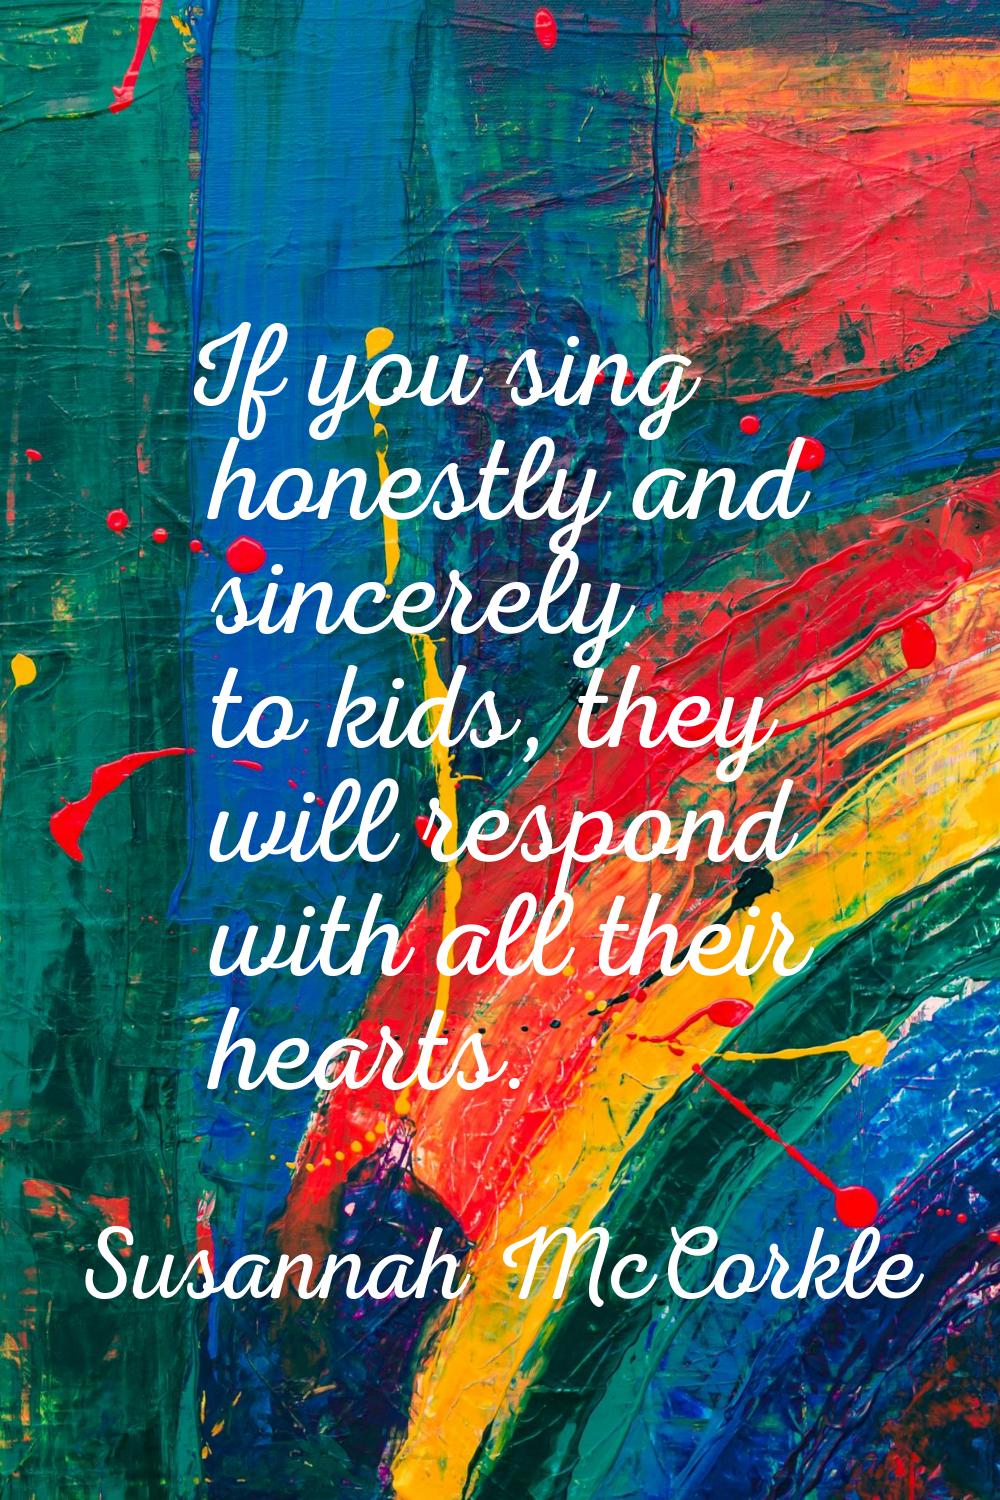 If you sing honestly and sincerely to kids, they will respond with all their hearts.